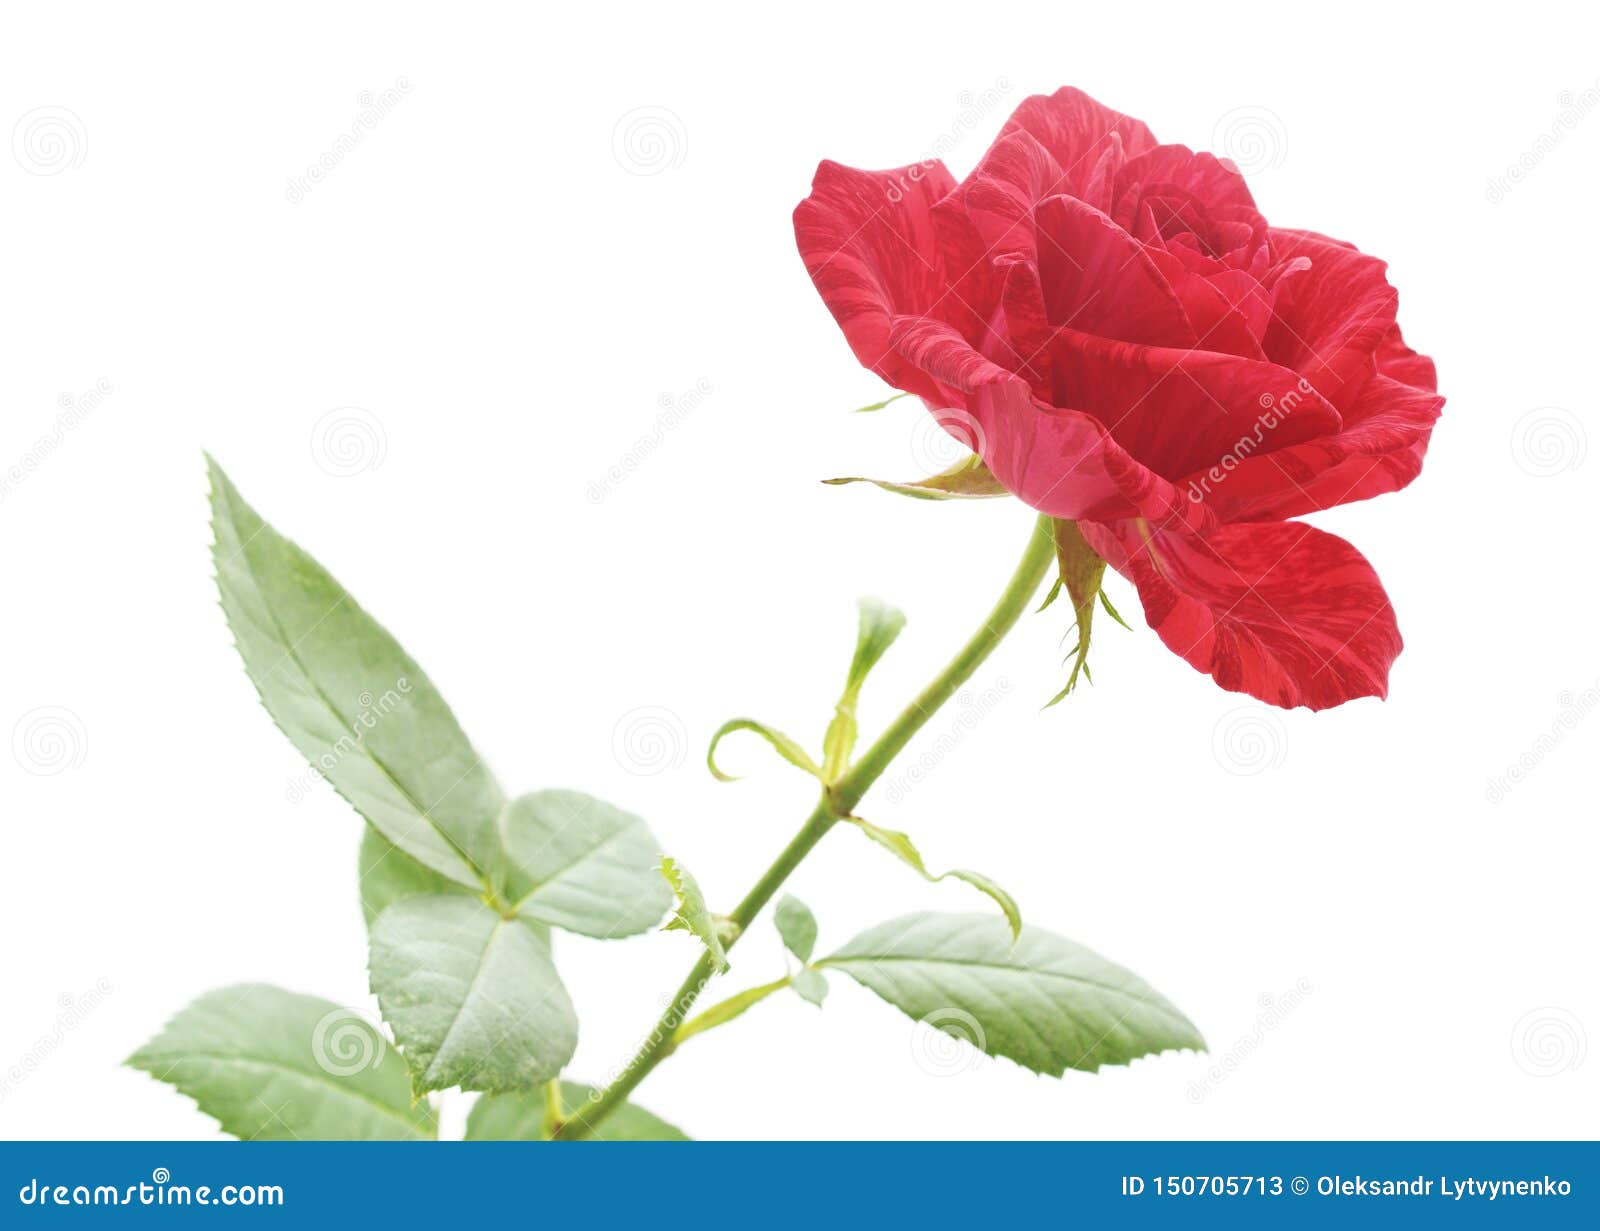 One red rose stock image. Image of white, plant, flowers - 150705713